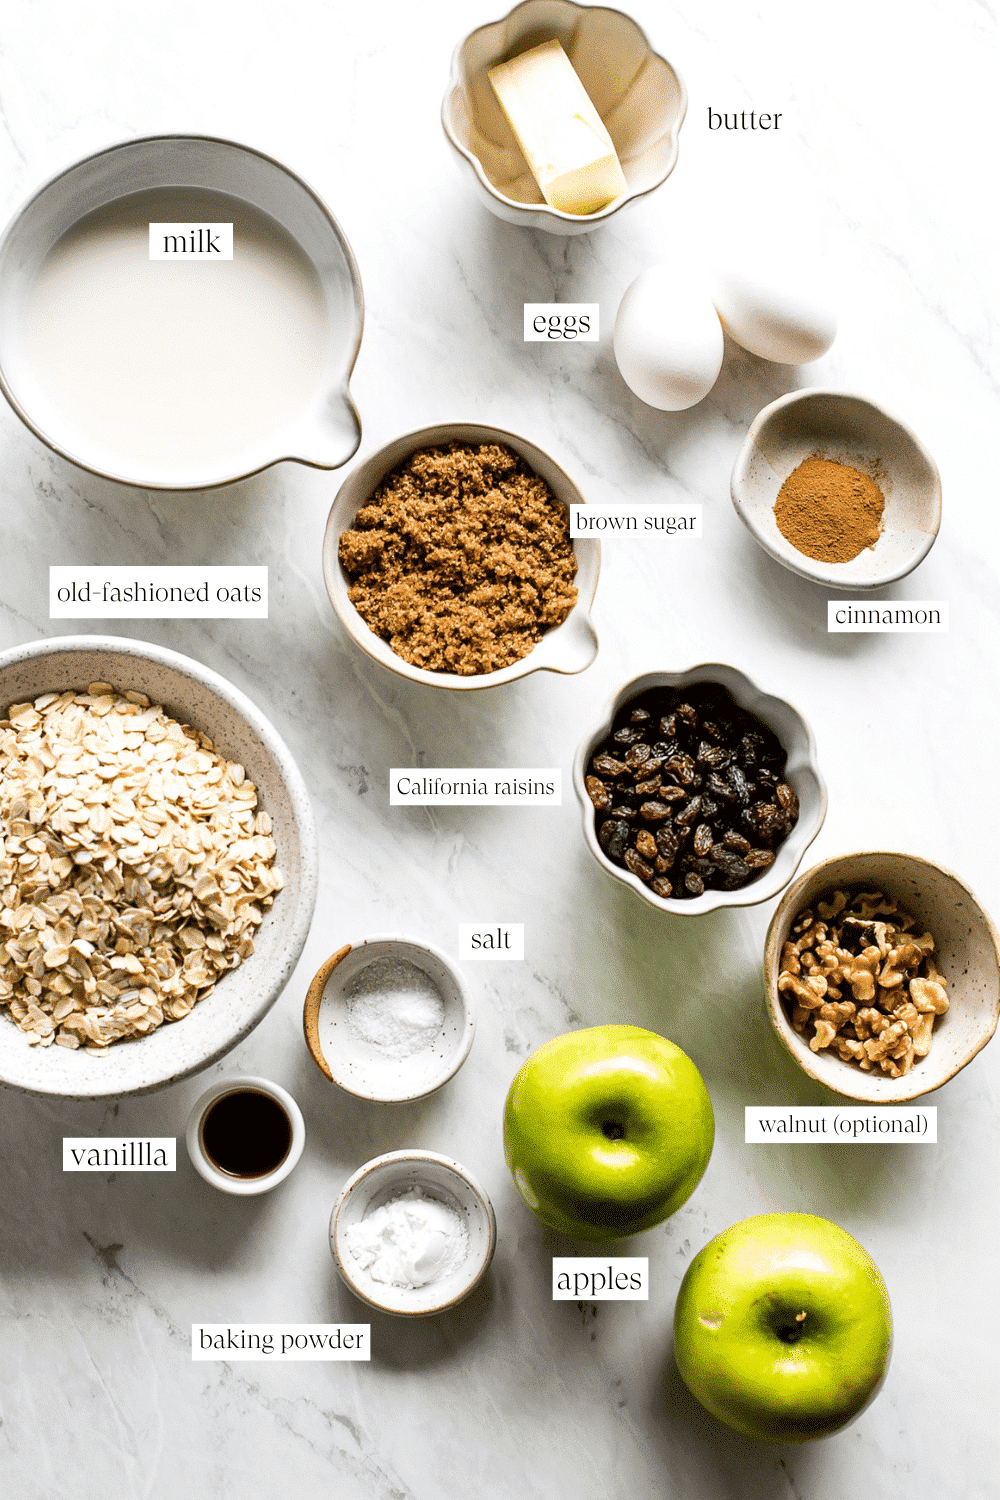 Ingredients for baked oatmeal with apples and raisins.